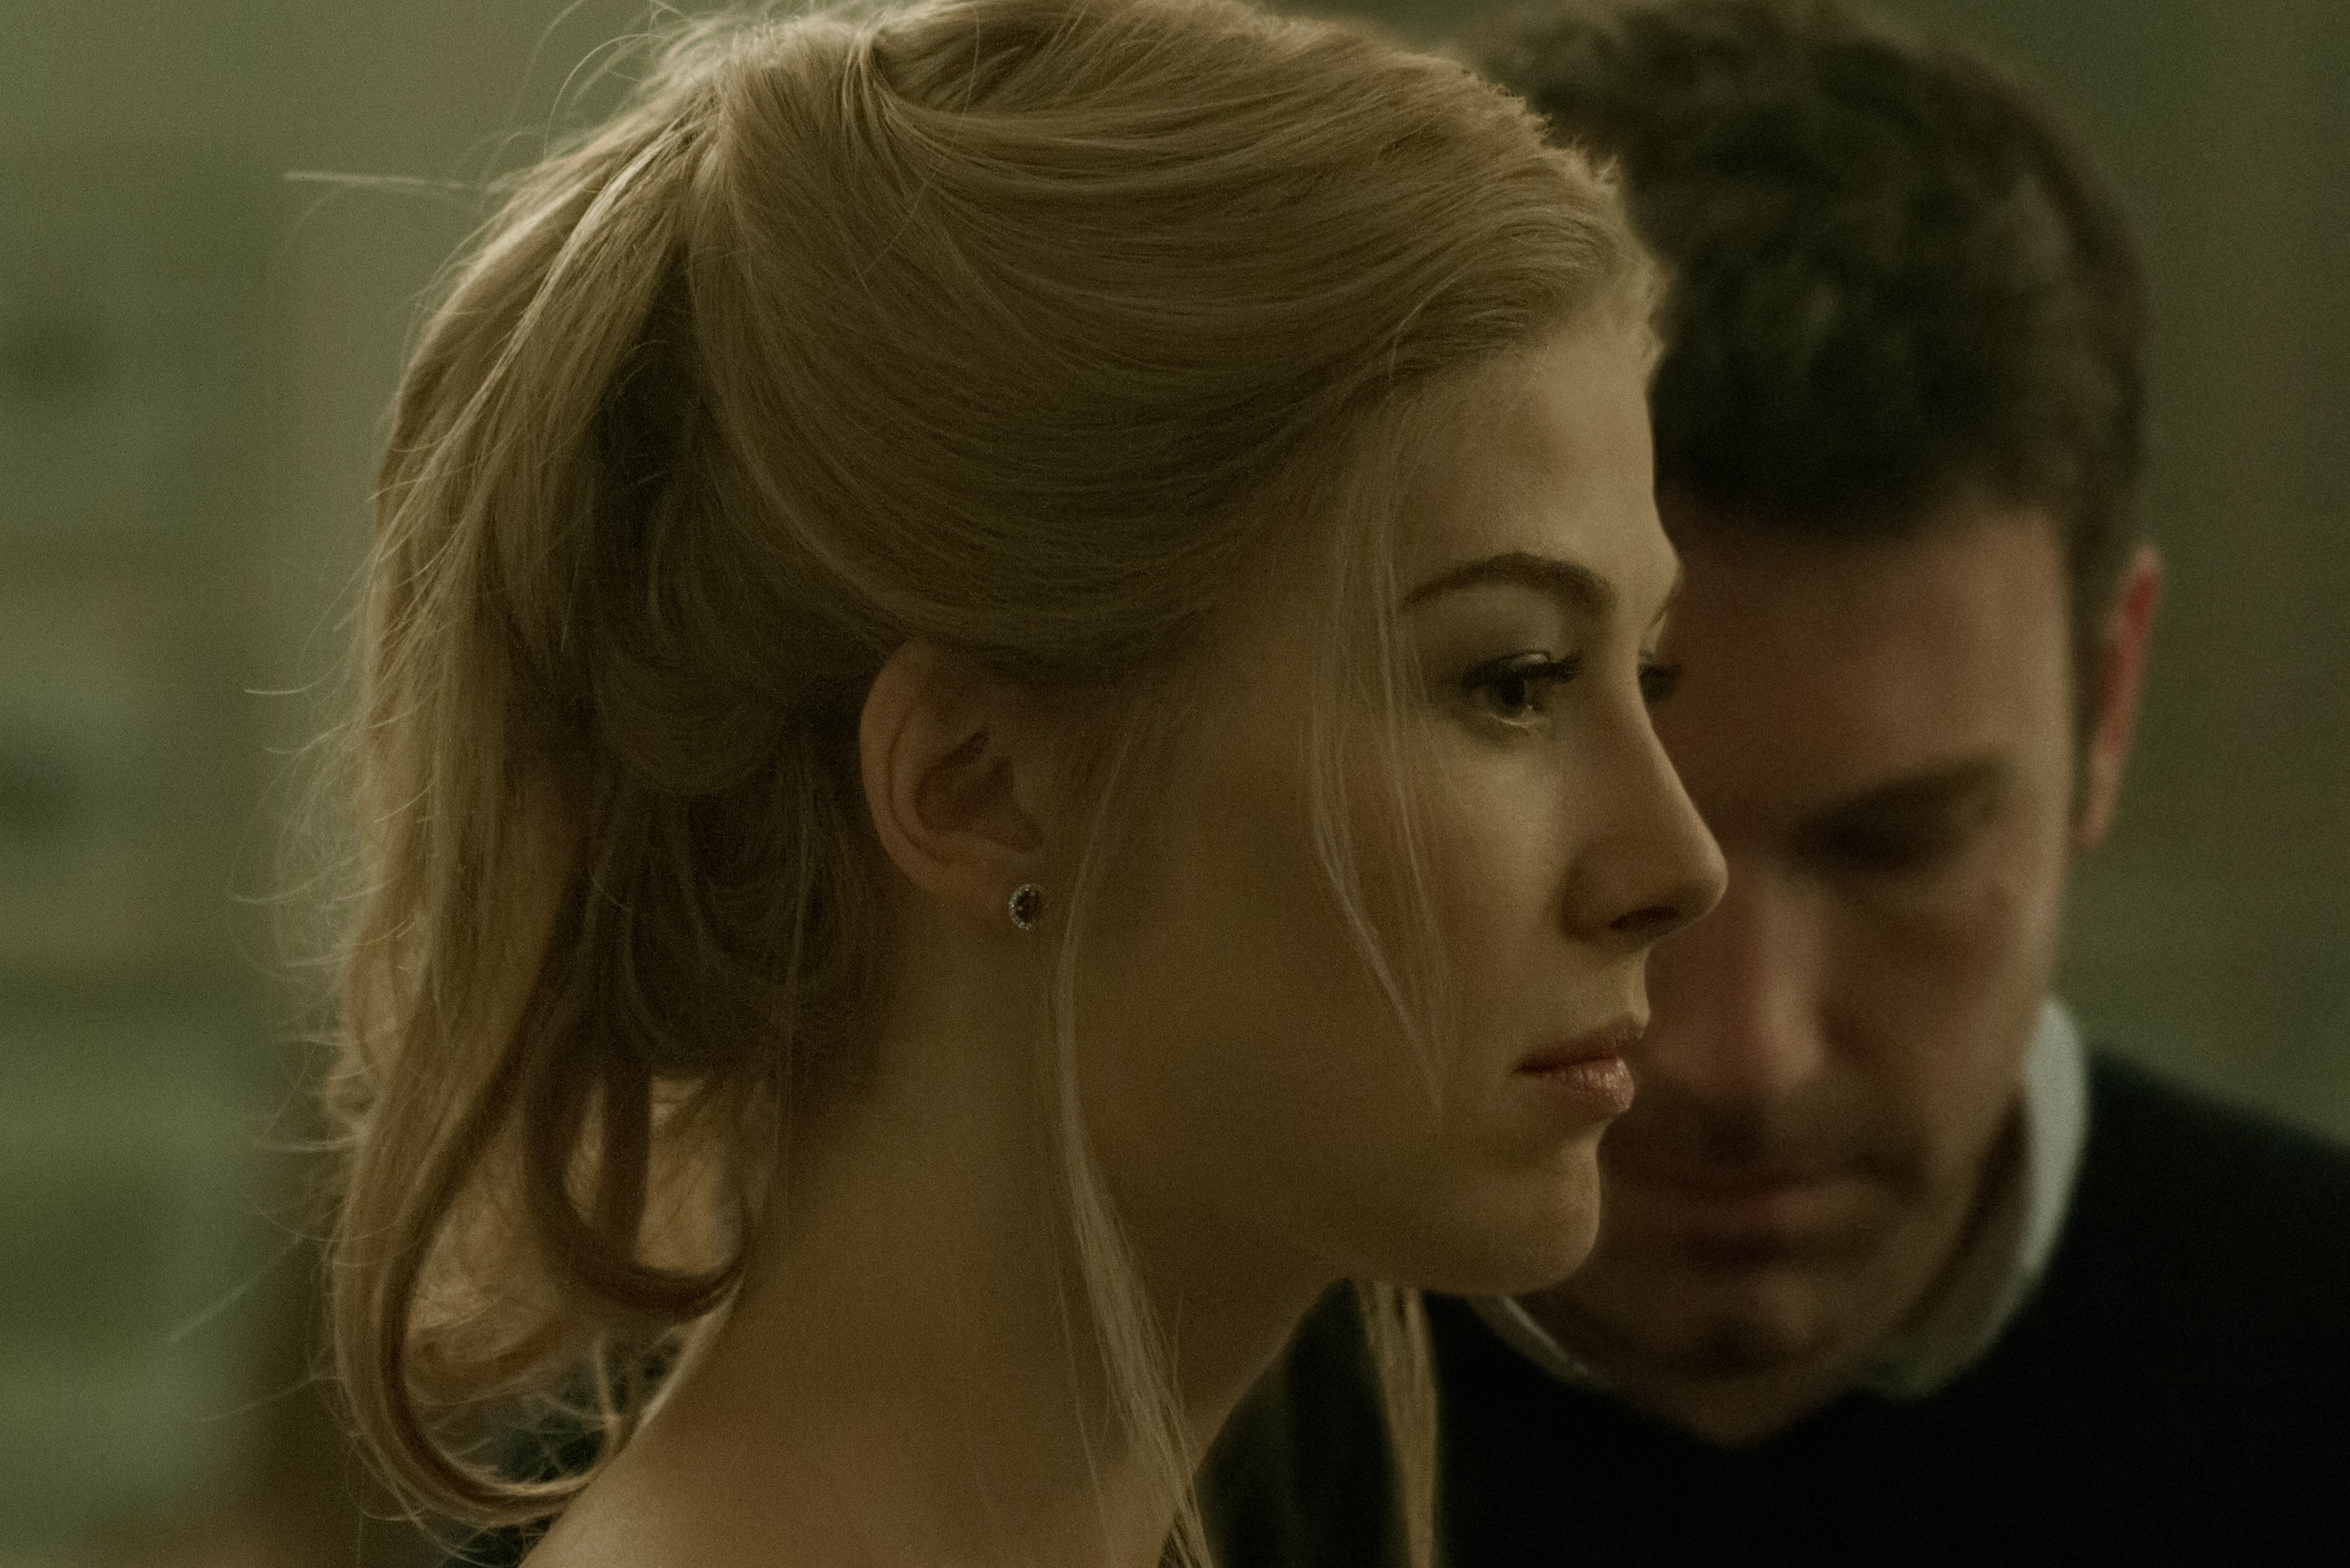 Web of lies: Rosamund Pike and Ben Affleck in ‘Gone Girl'